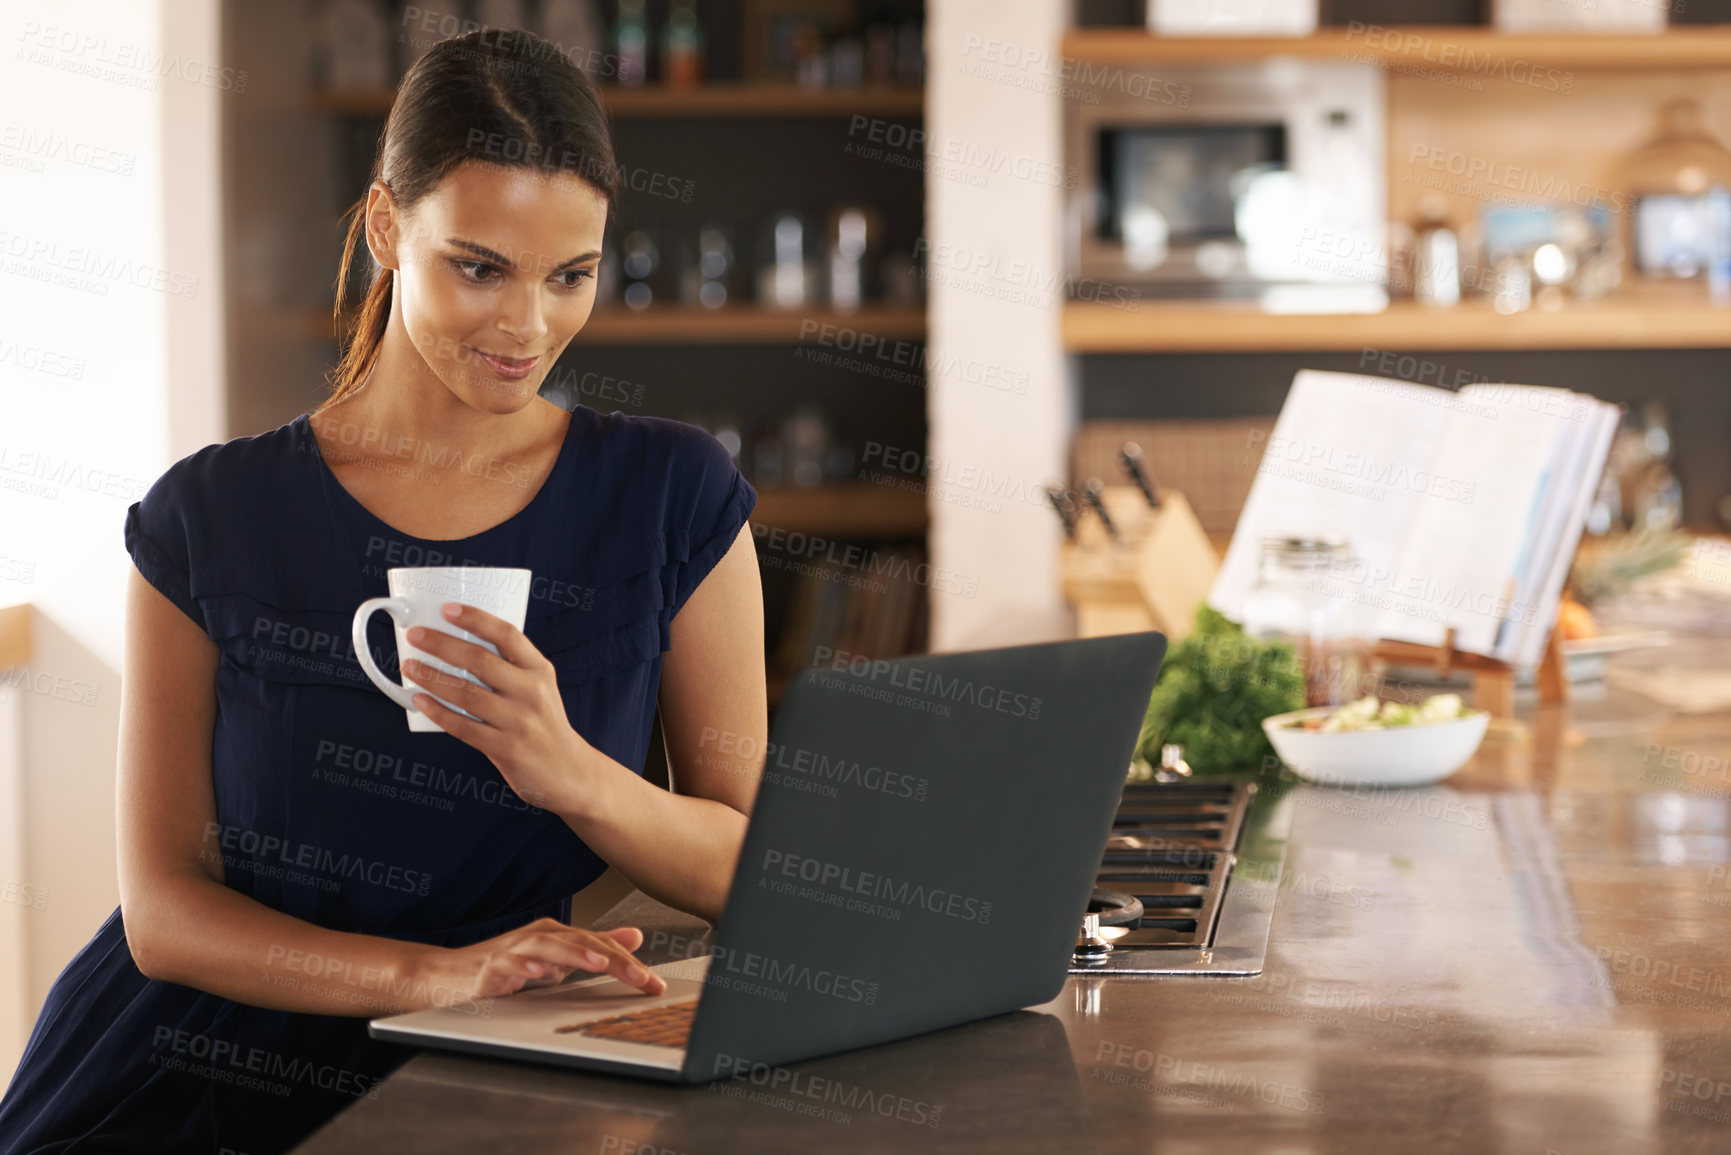 Buy stock photo Shot of an attractive young woman using her laptop while enjoying a cup of coffee